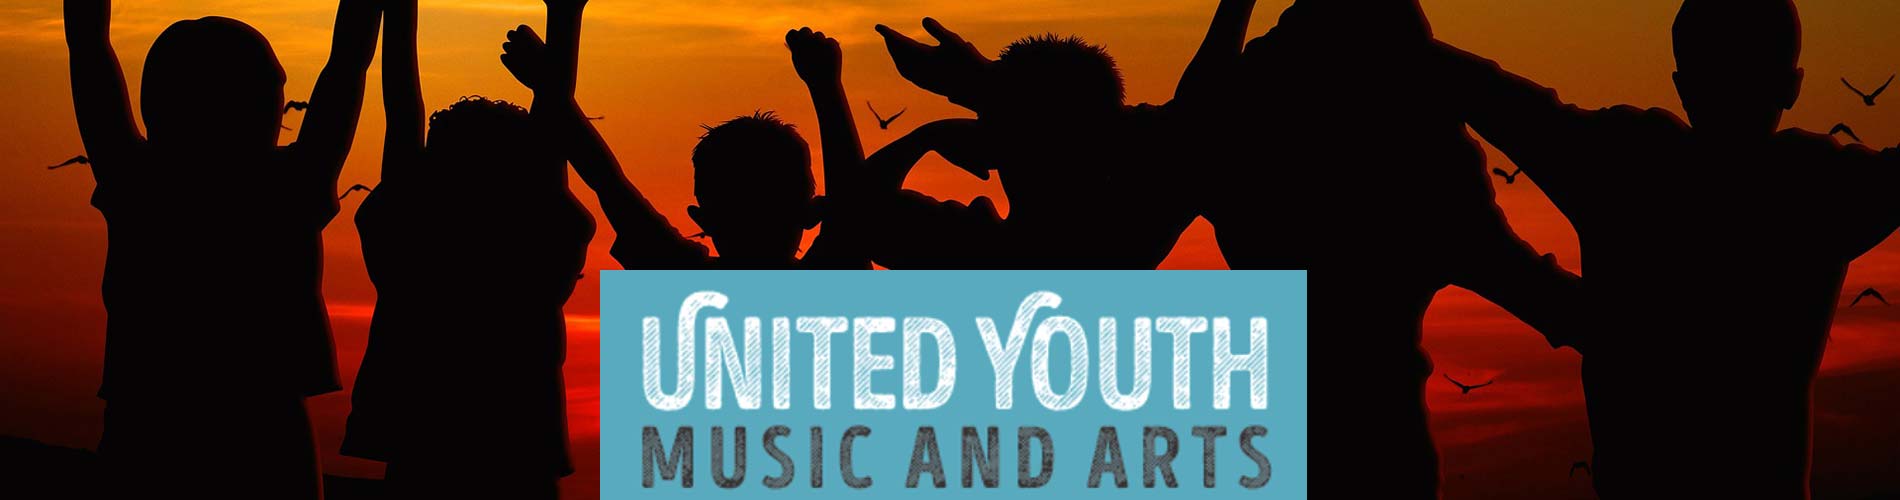 United Youth Music and Arts